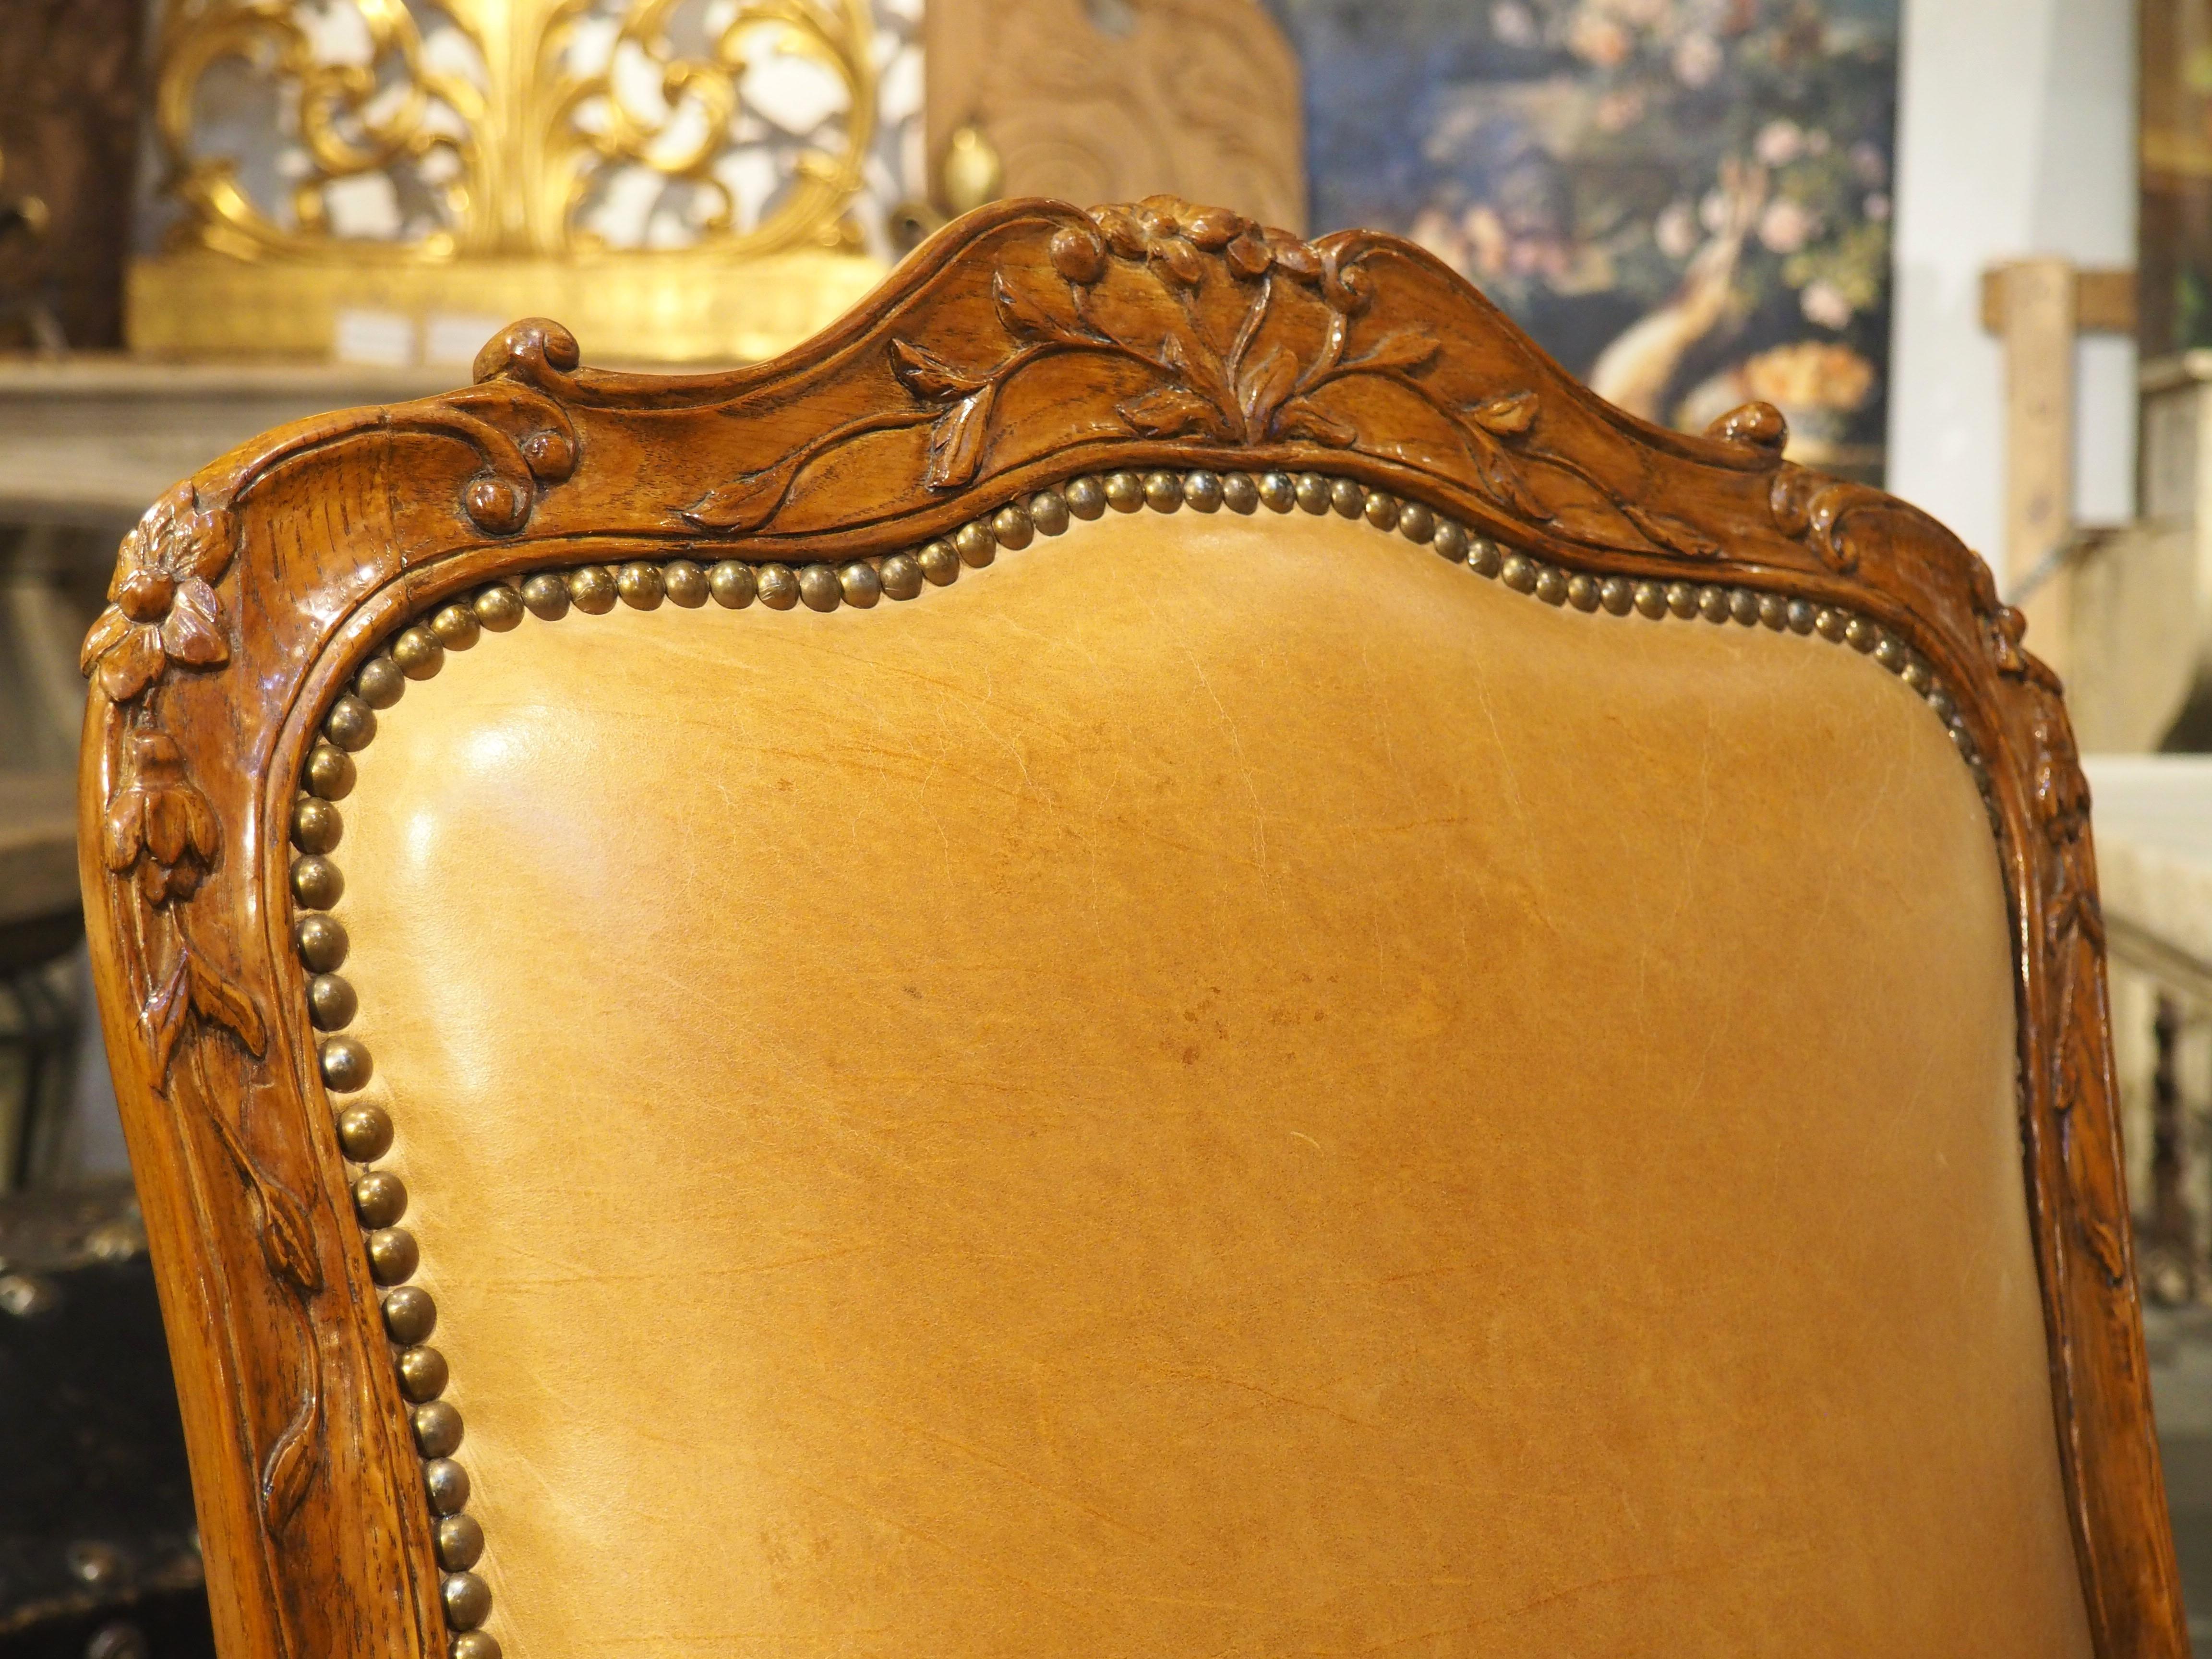 Pair of French Carved Regence Style Armchairs with Leather Upholstery, C. 1900 For Sale 9